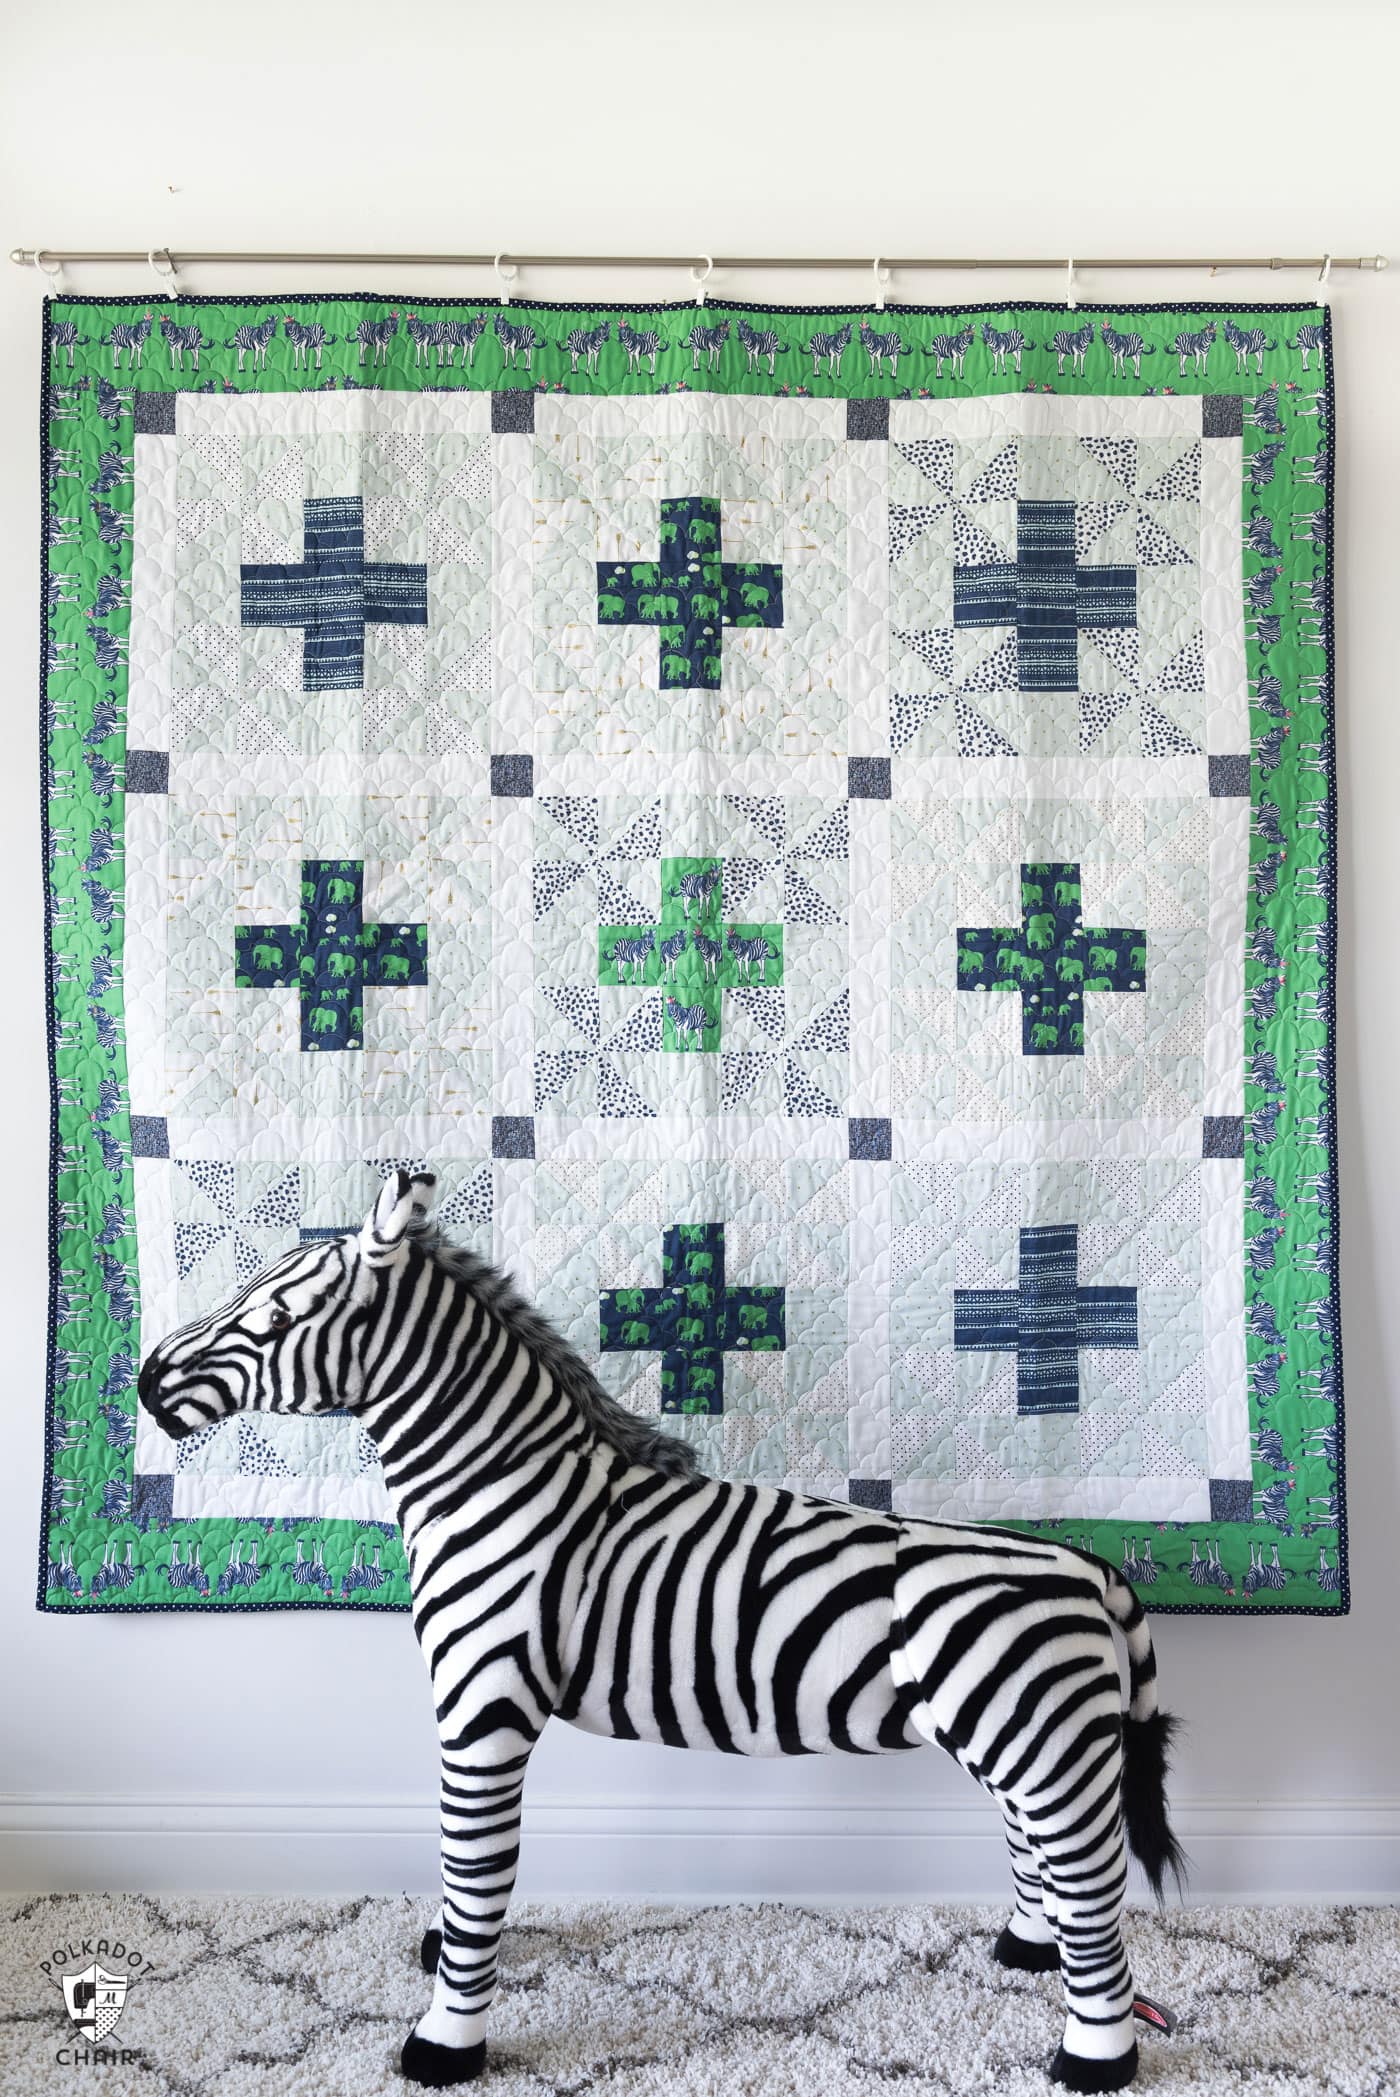 Patchwork Safari Quilt Pattern by Melissa Mortenson featuring Safari Party Fabrics, a cute take on a plus quilt pattern! Simple and fun!